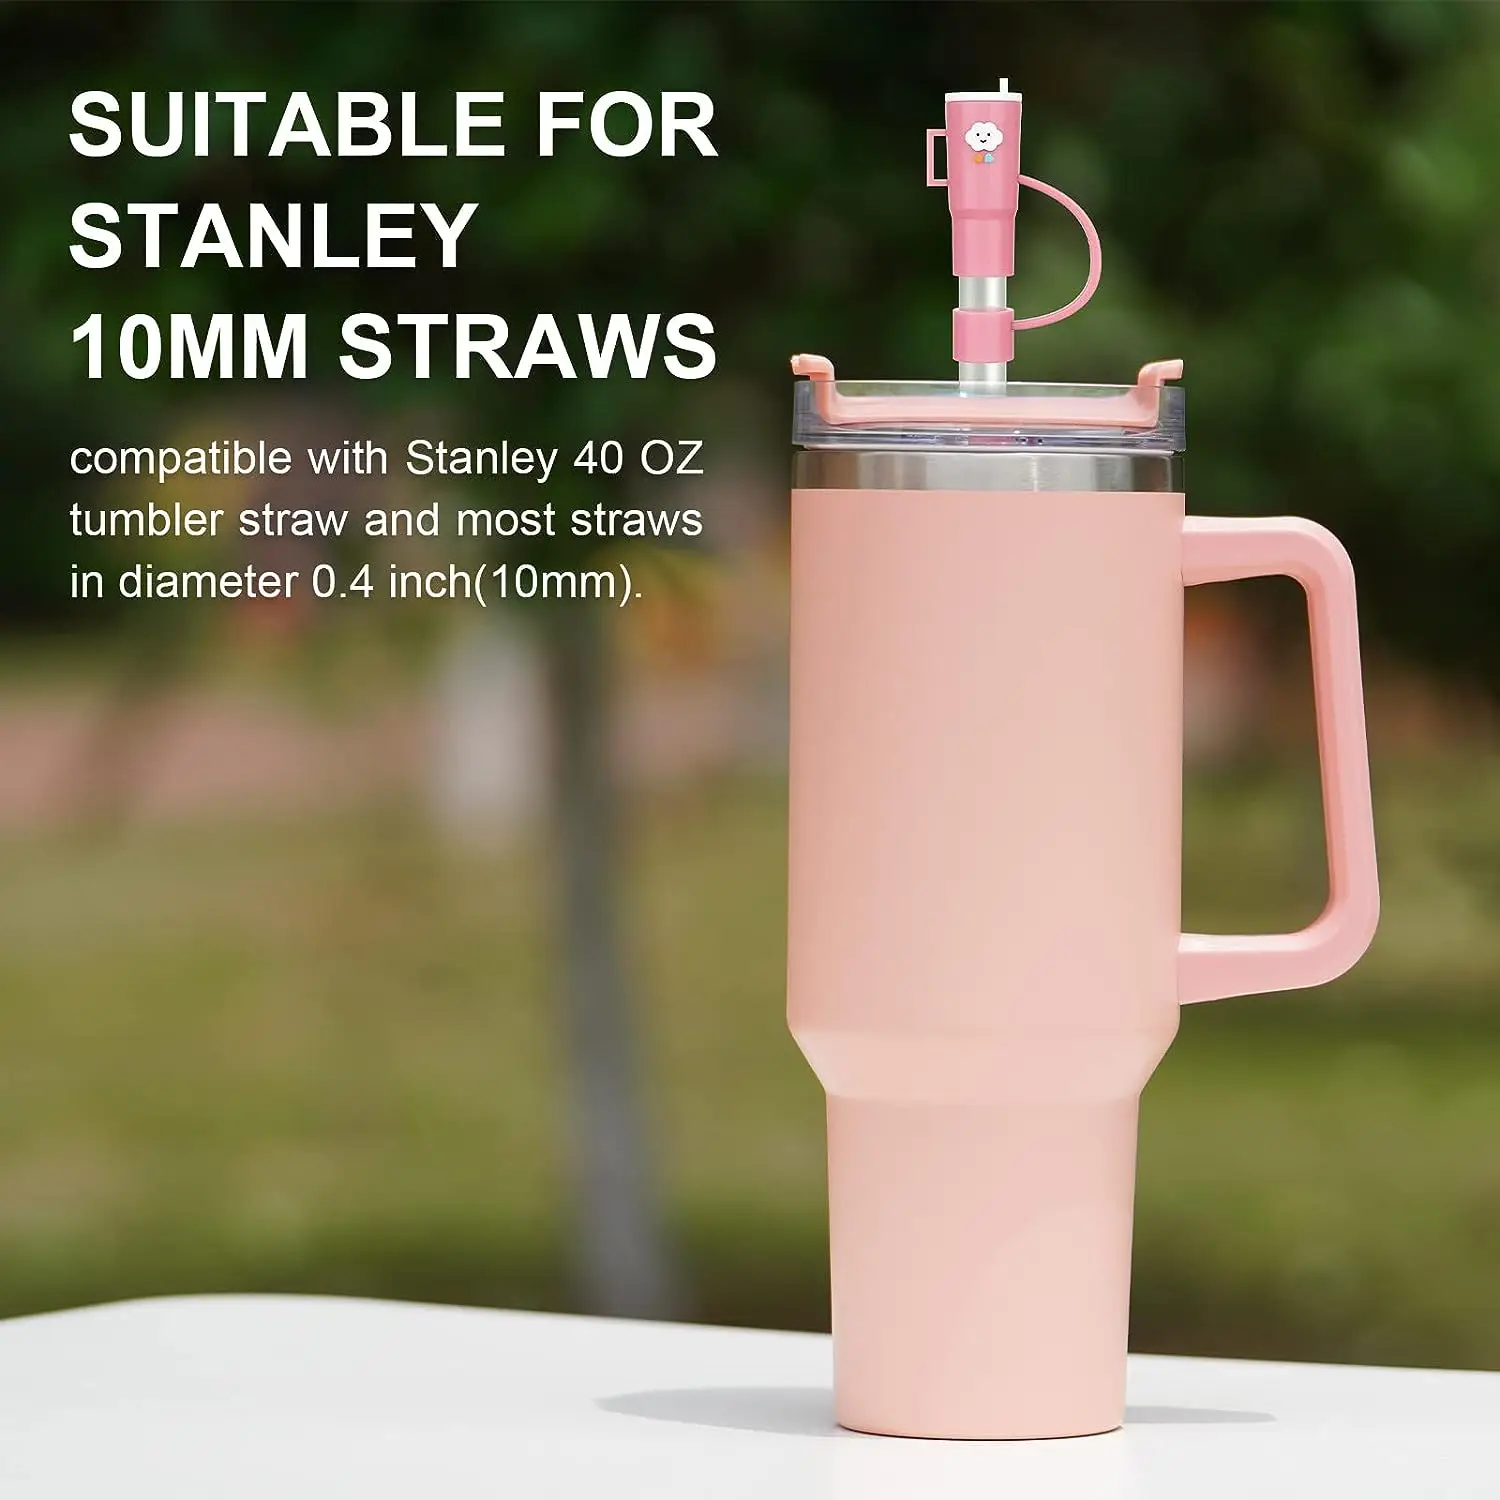 https://ae01.alicdn.com/kf/Sb4520b6e540842e38b31dcdf2f7948c9V/Cute-Silicone-Straw-Covers-Cap-for-Stanley-Cup-Dust-Proof-Drinking-Straw-Reusable-Straw.jpg